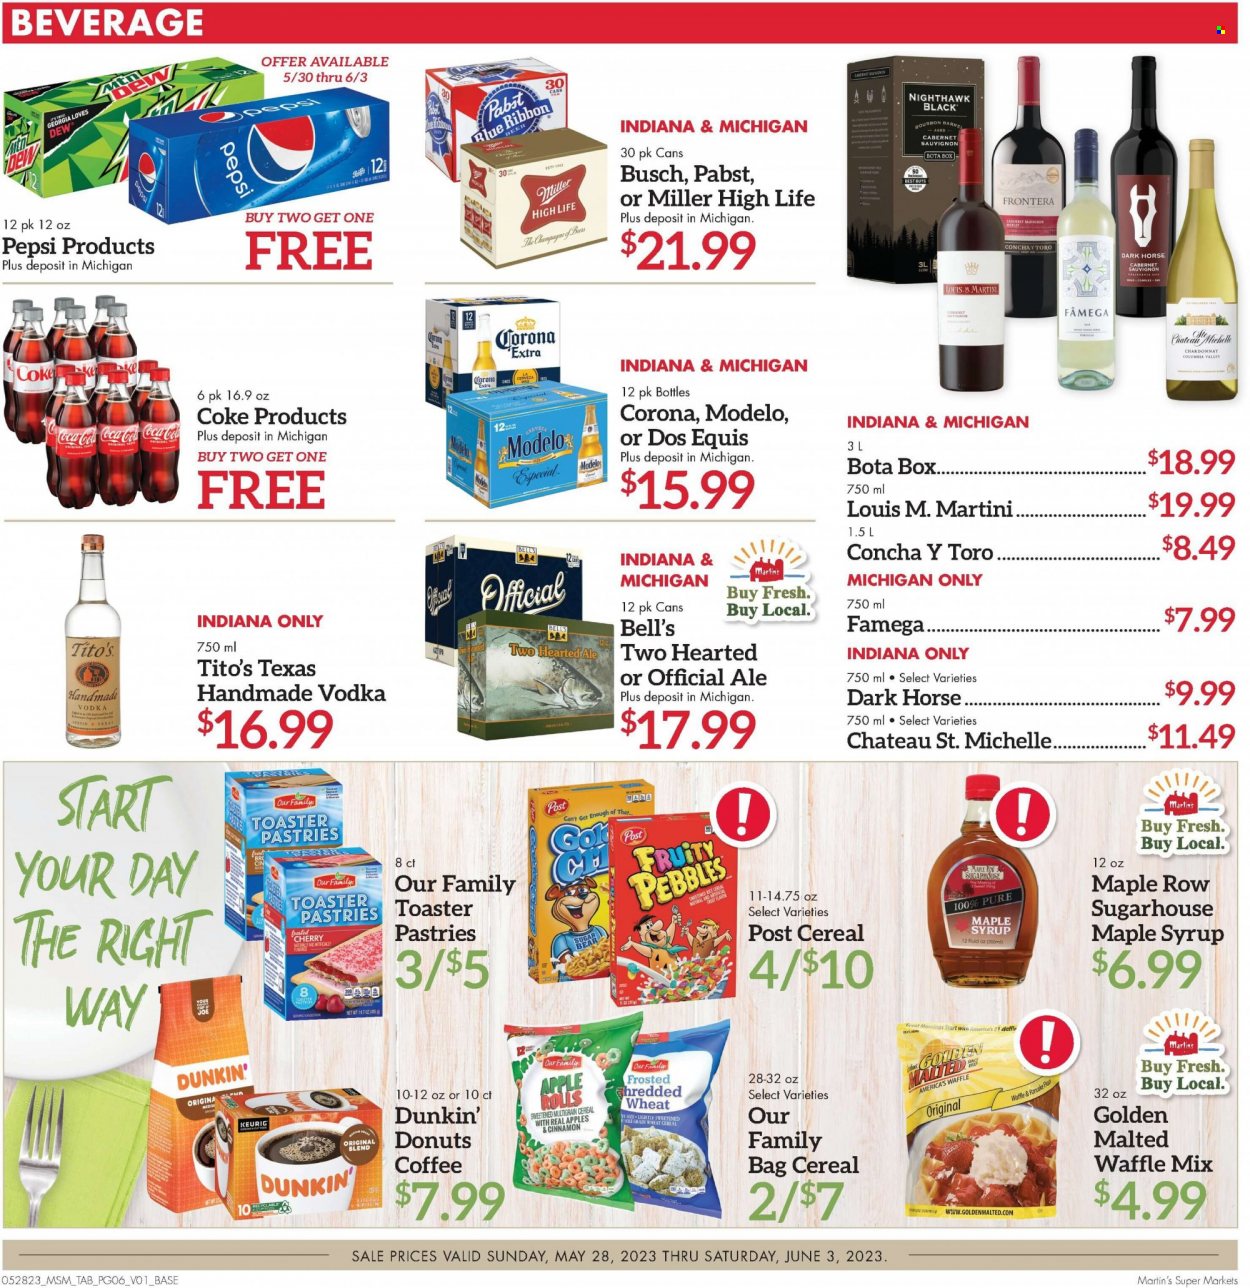 thumbnail - Martin’s Flyer - 05/28/2023 - 06/03/2023 - Sales products - Dunkin' Donuts, apples, cherries, pancakes, sugar, cereals, Fruity Pebbles, rice, cinnamon, maple syrup, syrup, Coca-Cola, Pepsi, soft drink, Coke, Keurig, Cabernet Sauvignon, red wine, sparkling wine, white wine, champagne, Chardonnay, wine, alcohol, vodka, beer, Busch, Corona Extra, Miller, Modelo, Pabst Blue Ribbon, Bell's, Pabst, Dos Equis. Page 6.